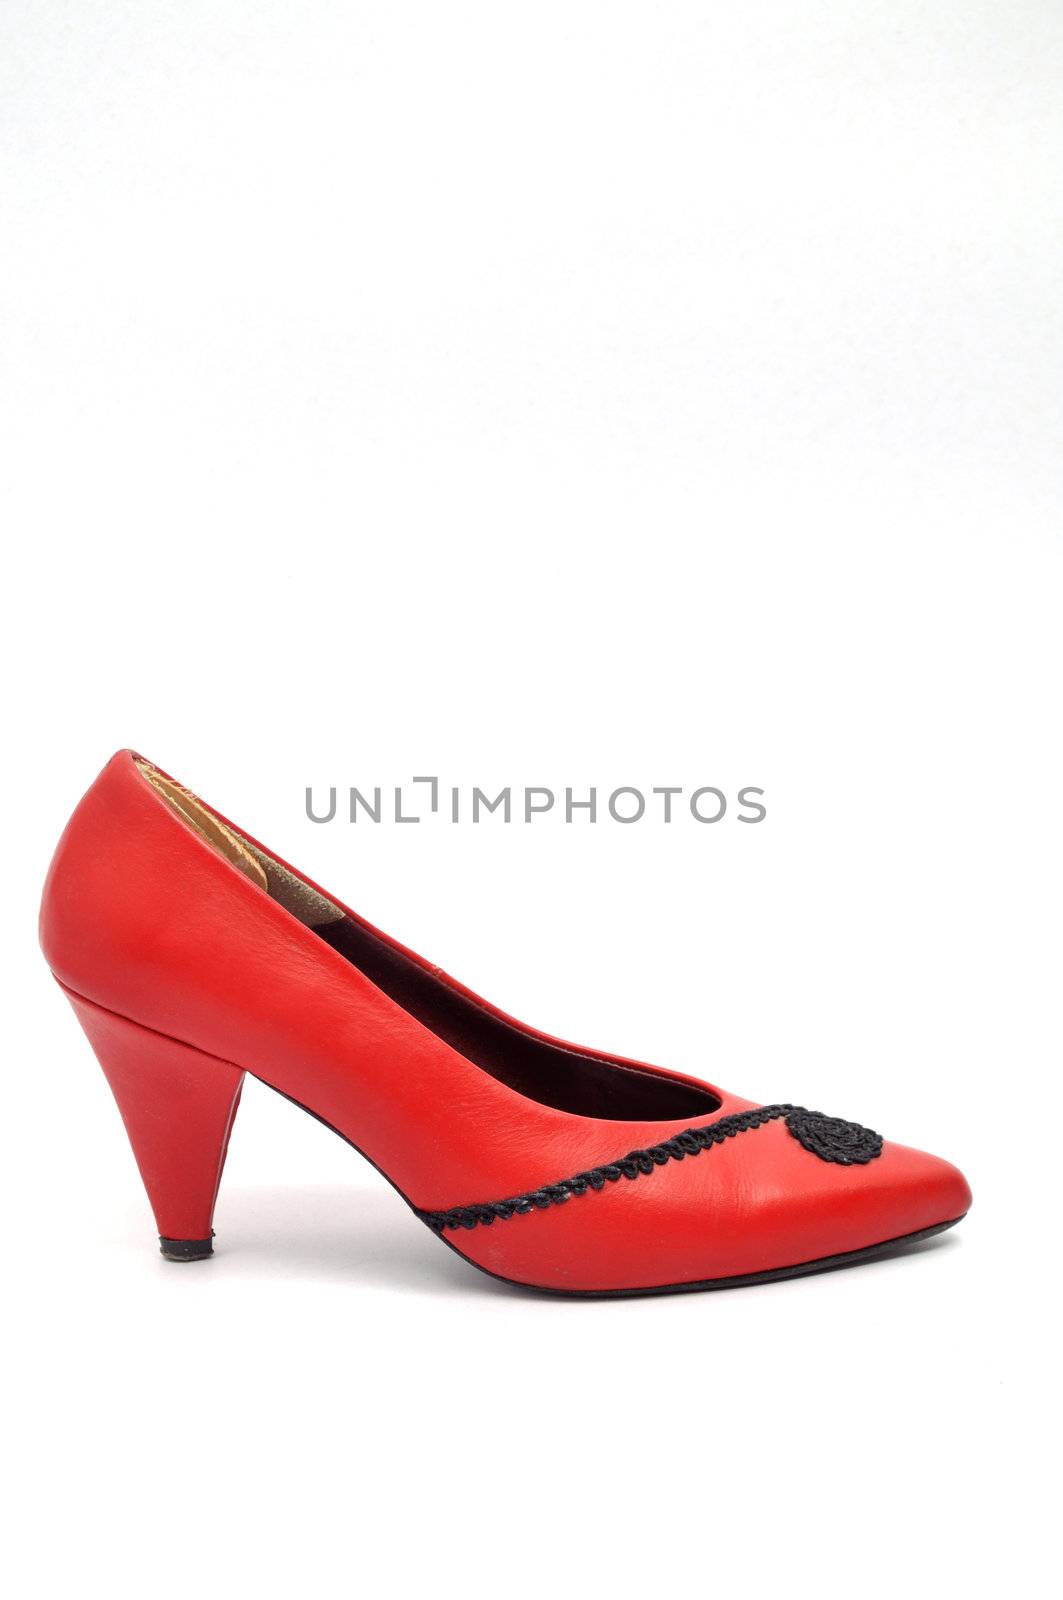 A Picture Of Women shoes on white background